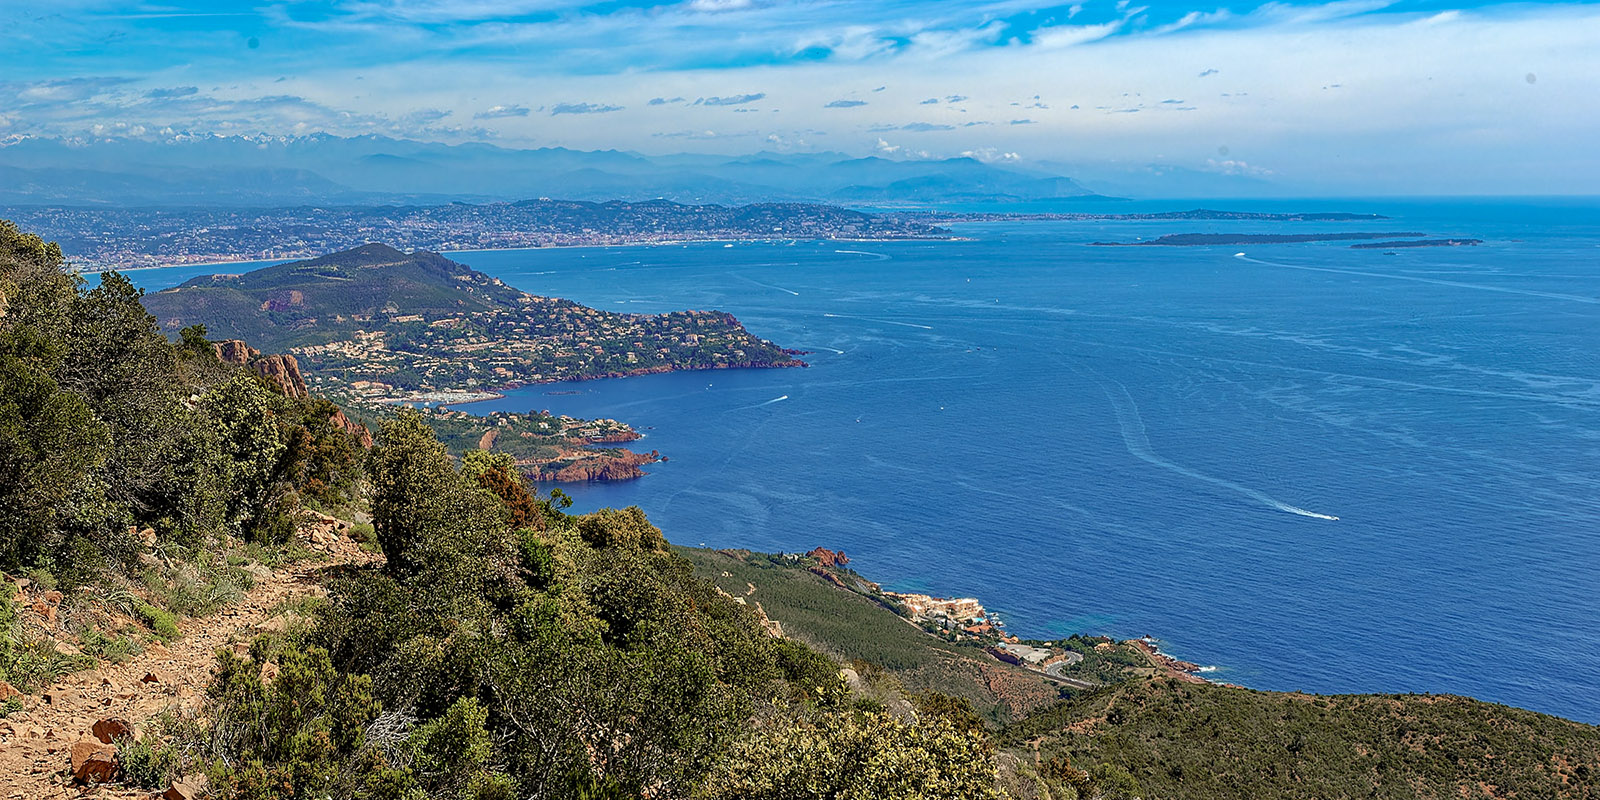 Looking from the summit towards Cannes and Nice